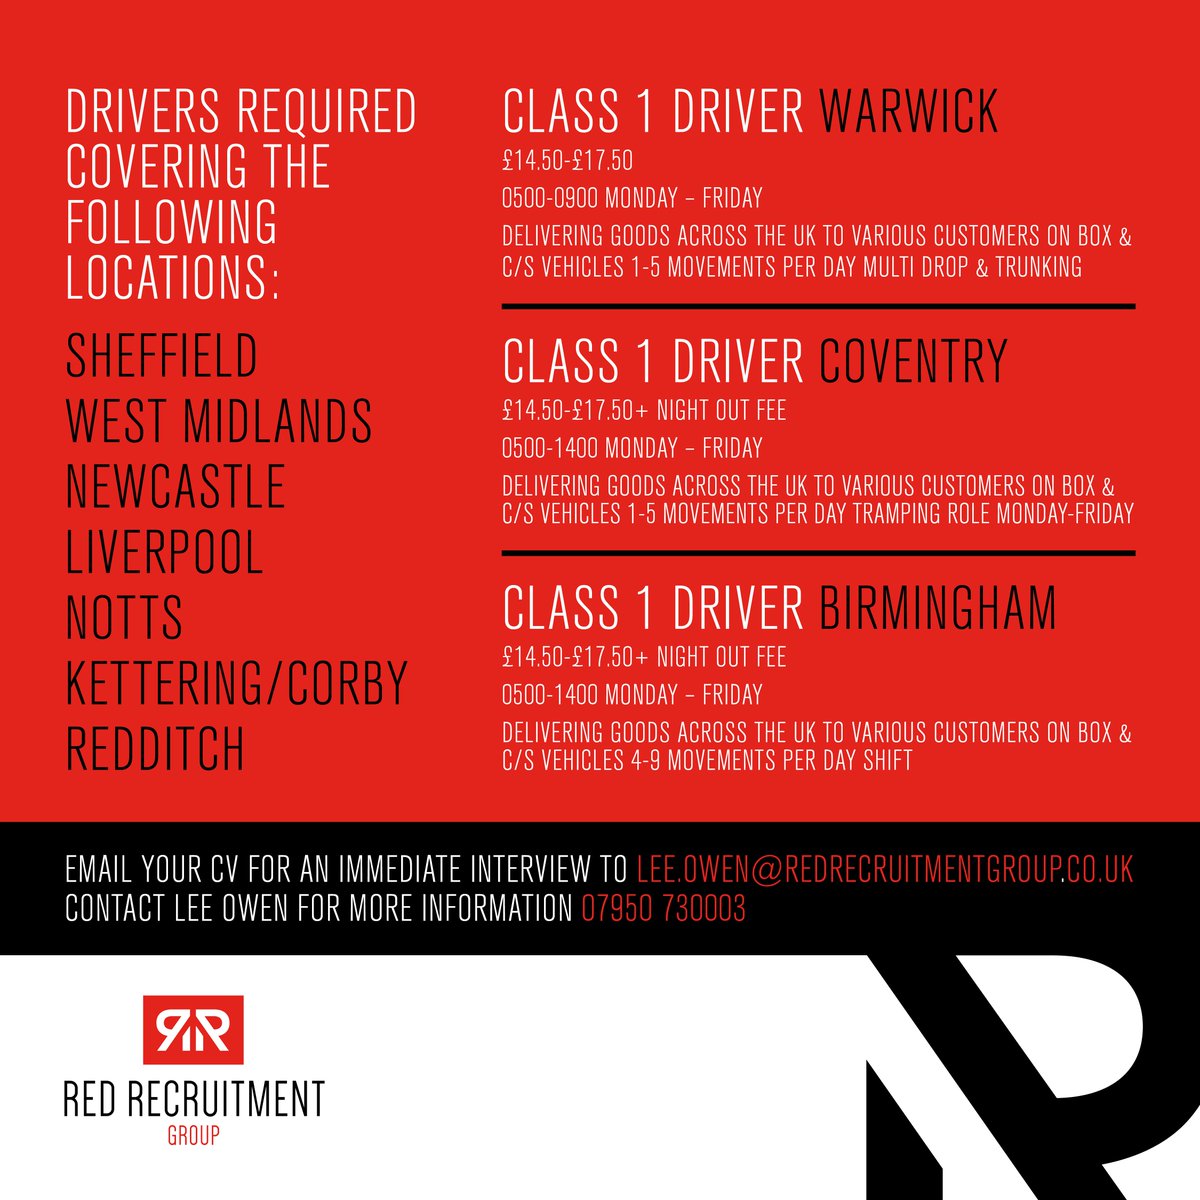 Here are our latest vacancies with opportunities across the UK...

If you're interested in any roles we have available, get in touch with our team at Red Recruitment today.

#warwick #coventry #birmingham #warwickjobs #covjobs #brumjobs #careers #recruitment #nottsjobs